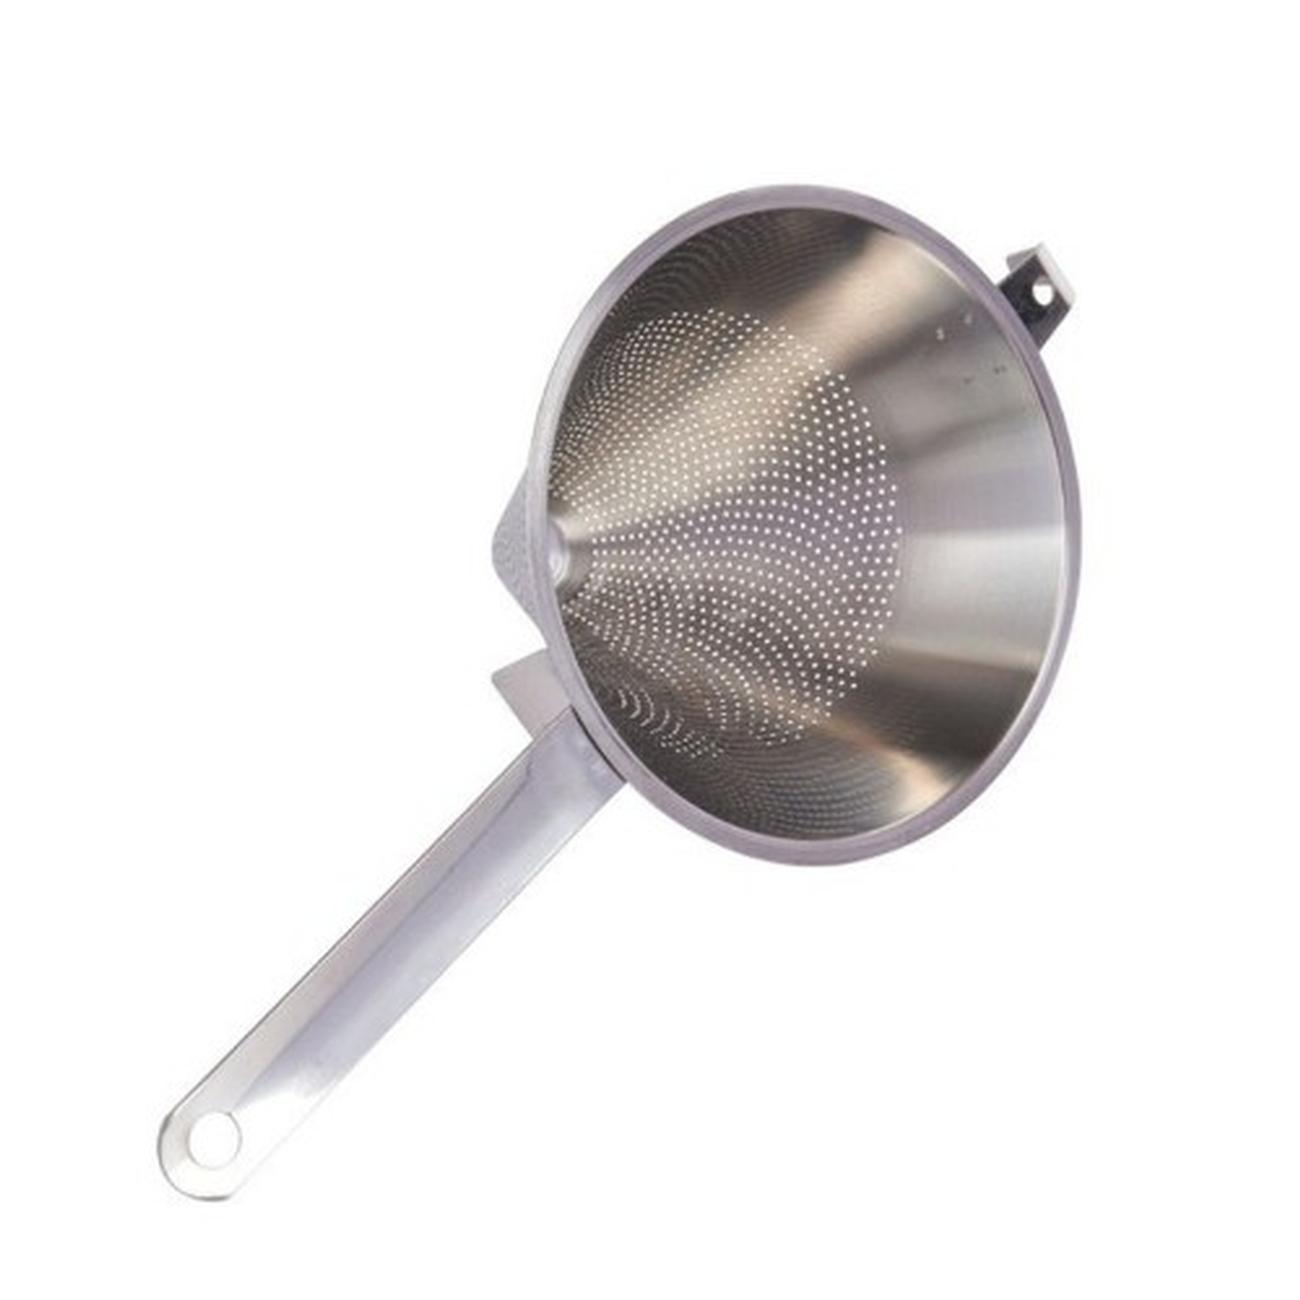 kitchecraft-stainless-steel-conical-sieve-17.5cm - KitchenCraft Stainless Steel Conical Sieve 17.5cm